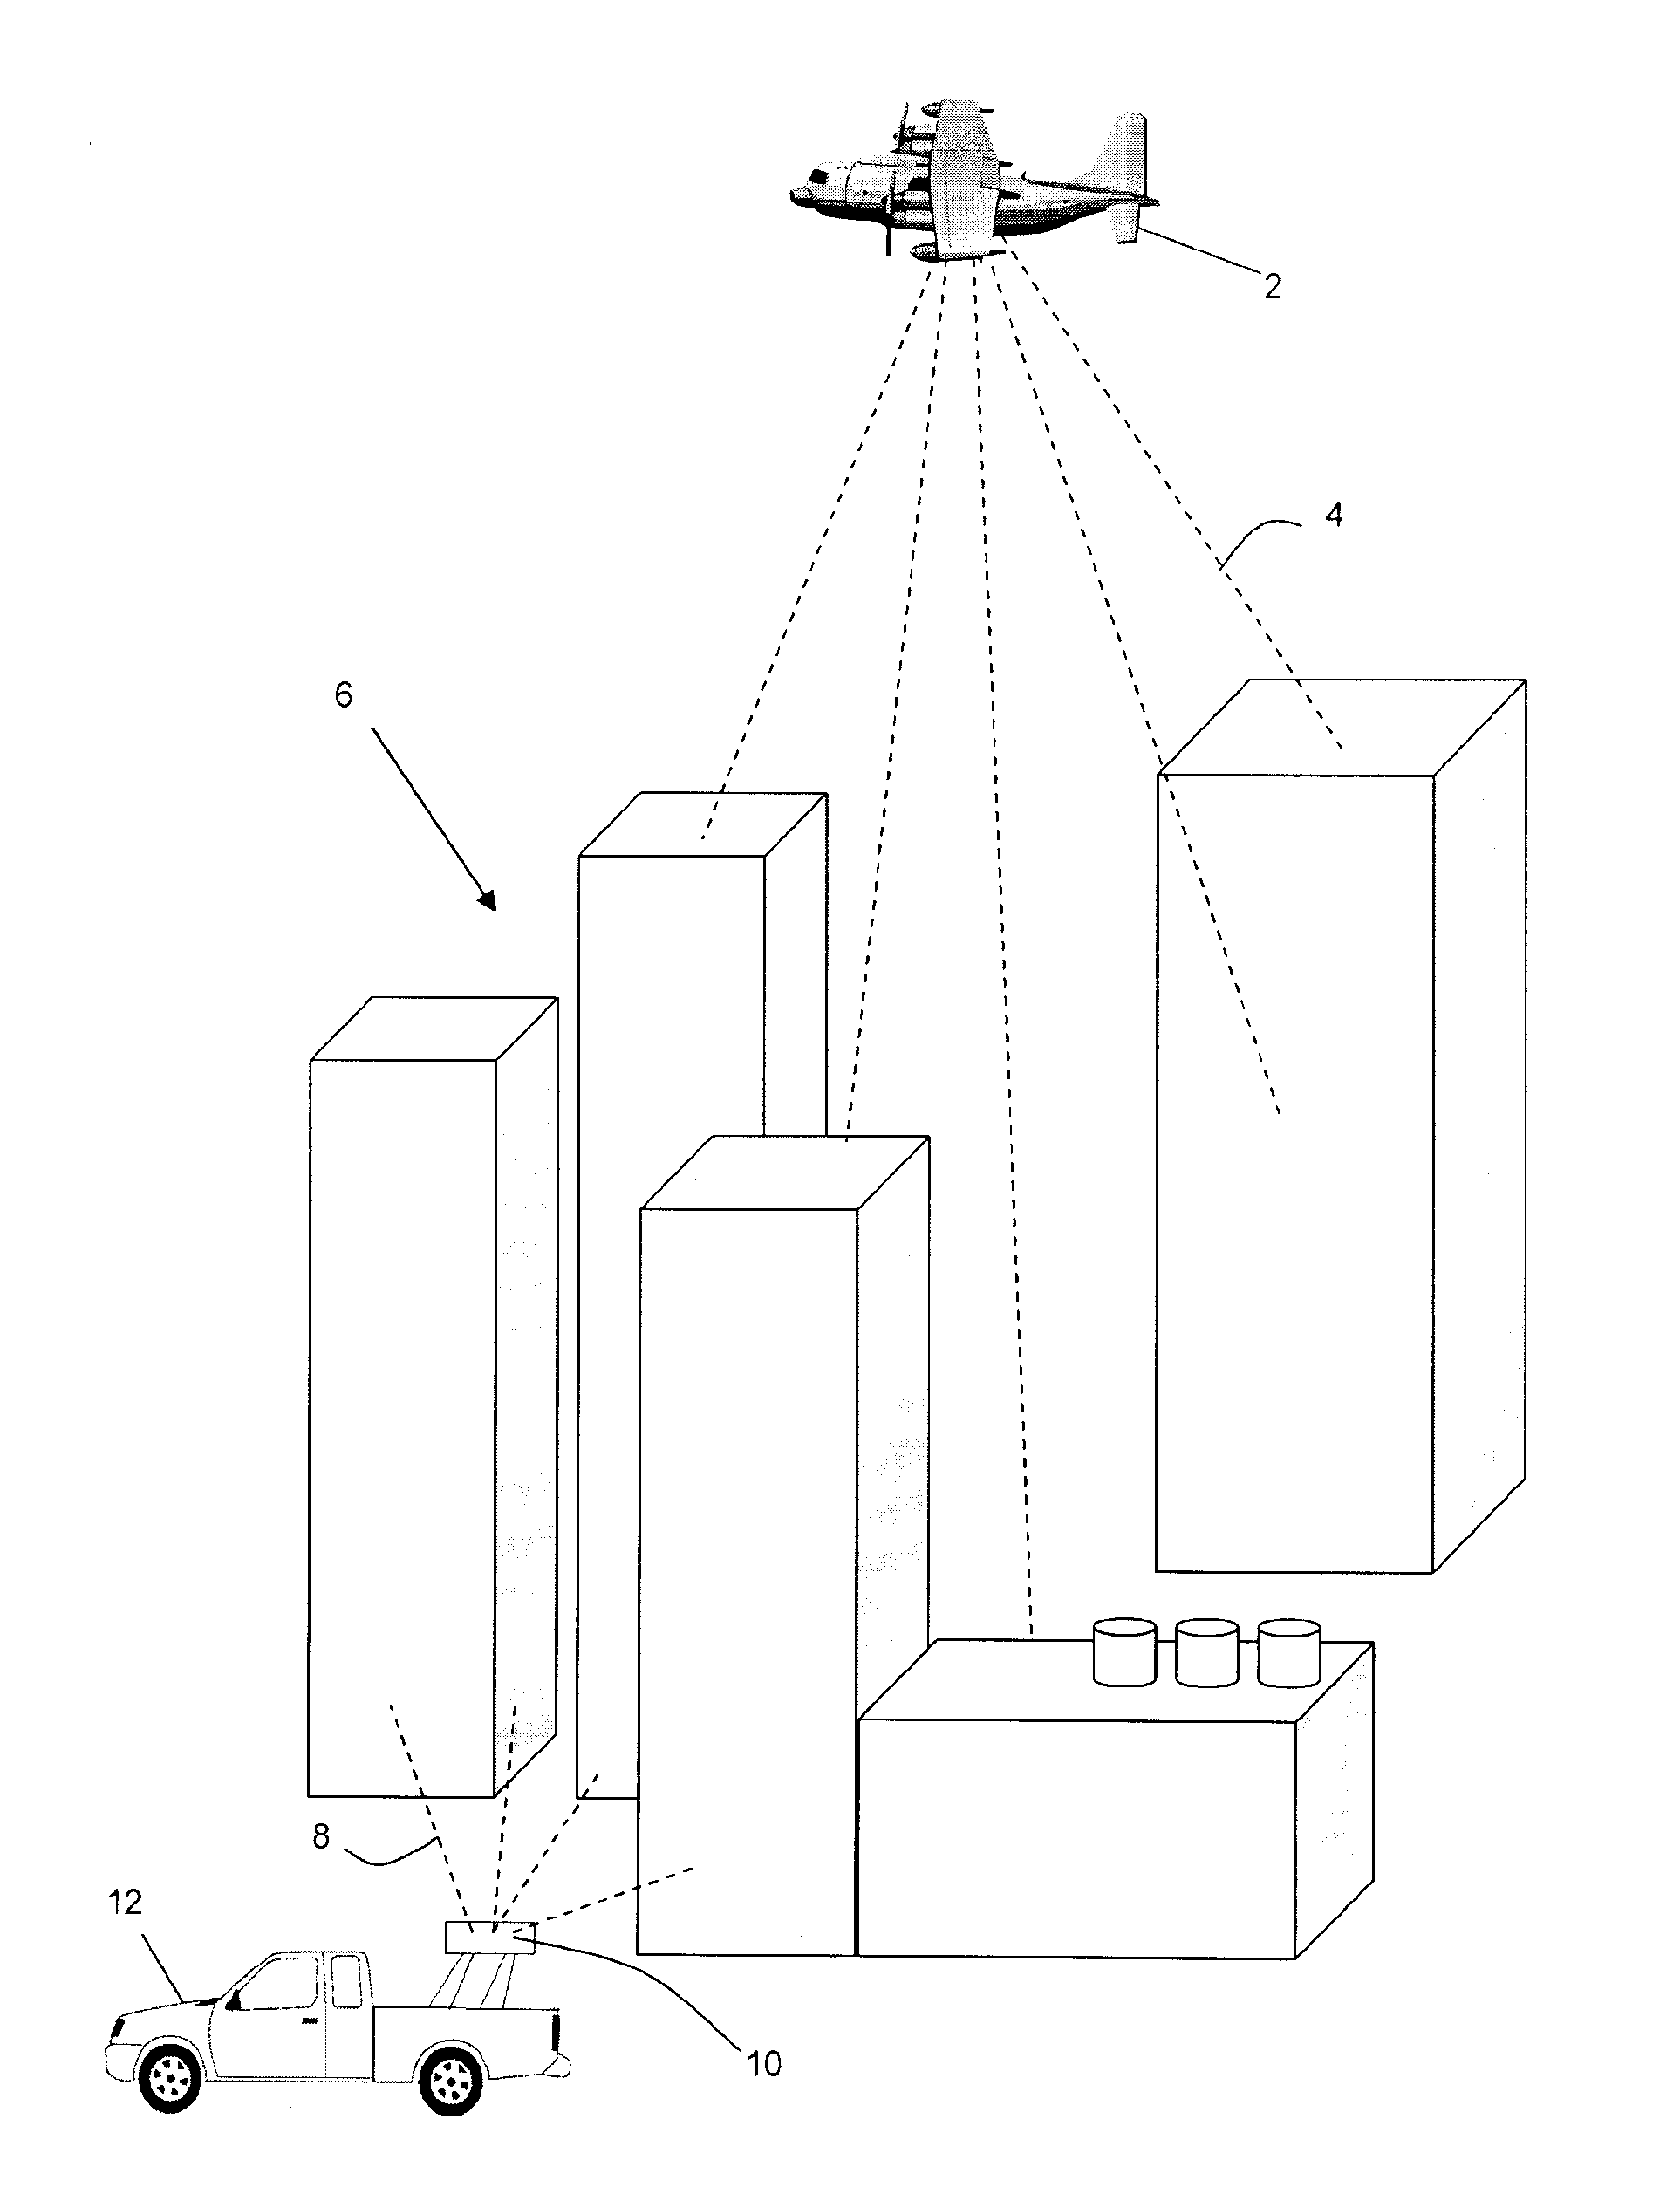 System and Method for Manipulating Data Having Spatial Co-ordinates